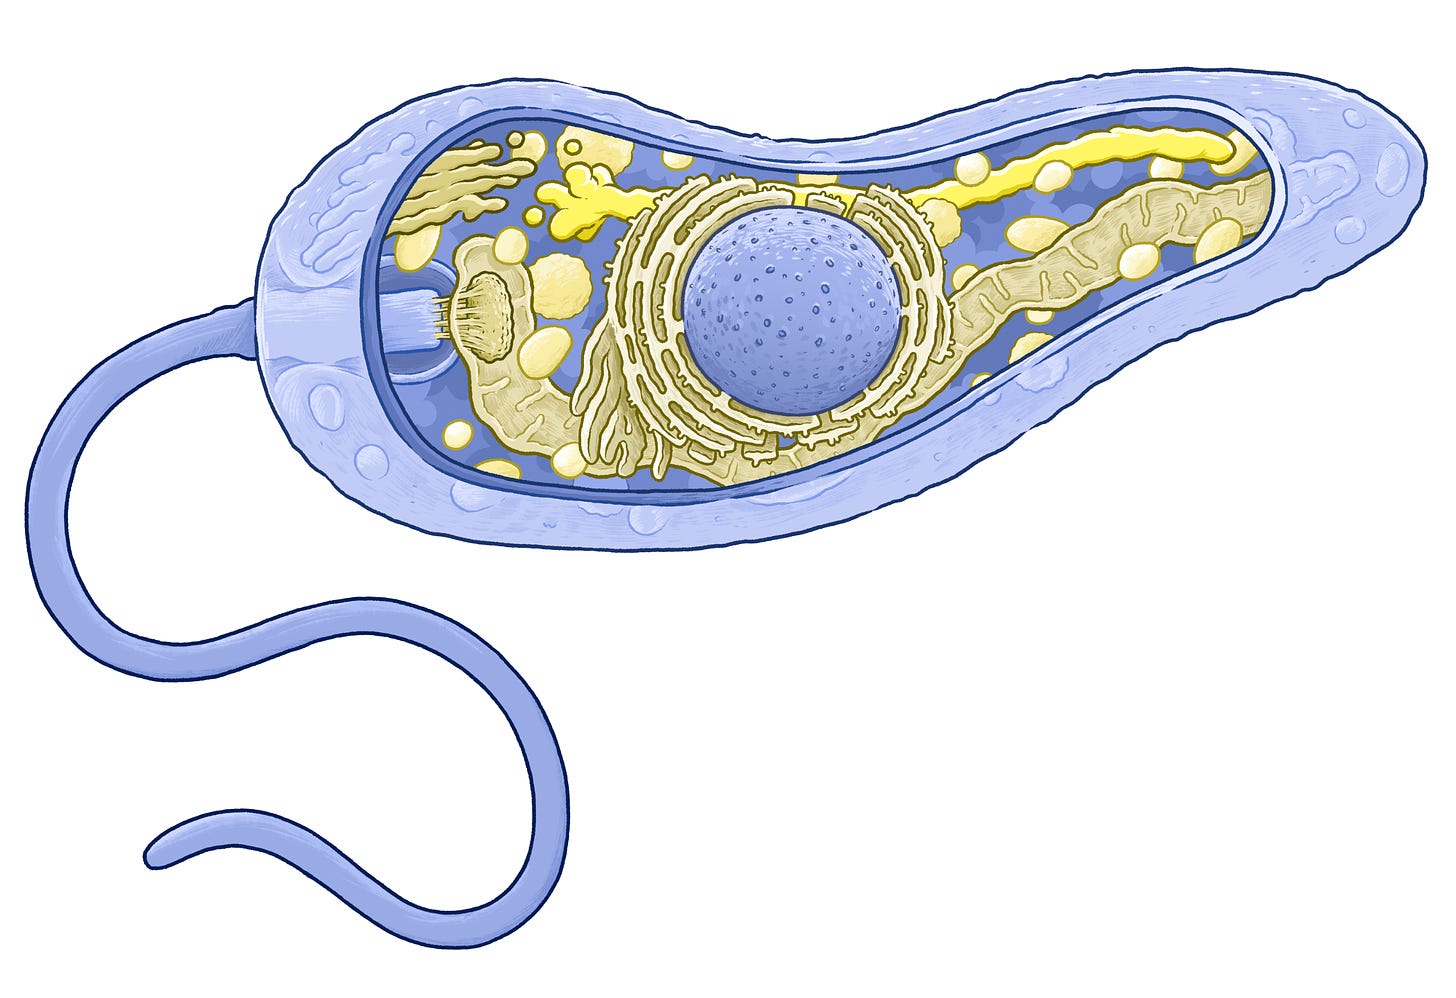 The same parasite diagram as above, but previewing what a colourblind person would see - a mix of blues and yellows, with the yellows used on organelles and the blues used for membrane and nucleus.